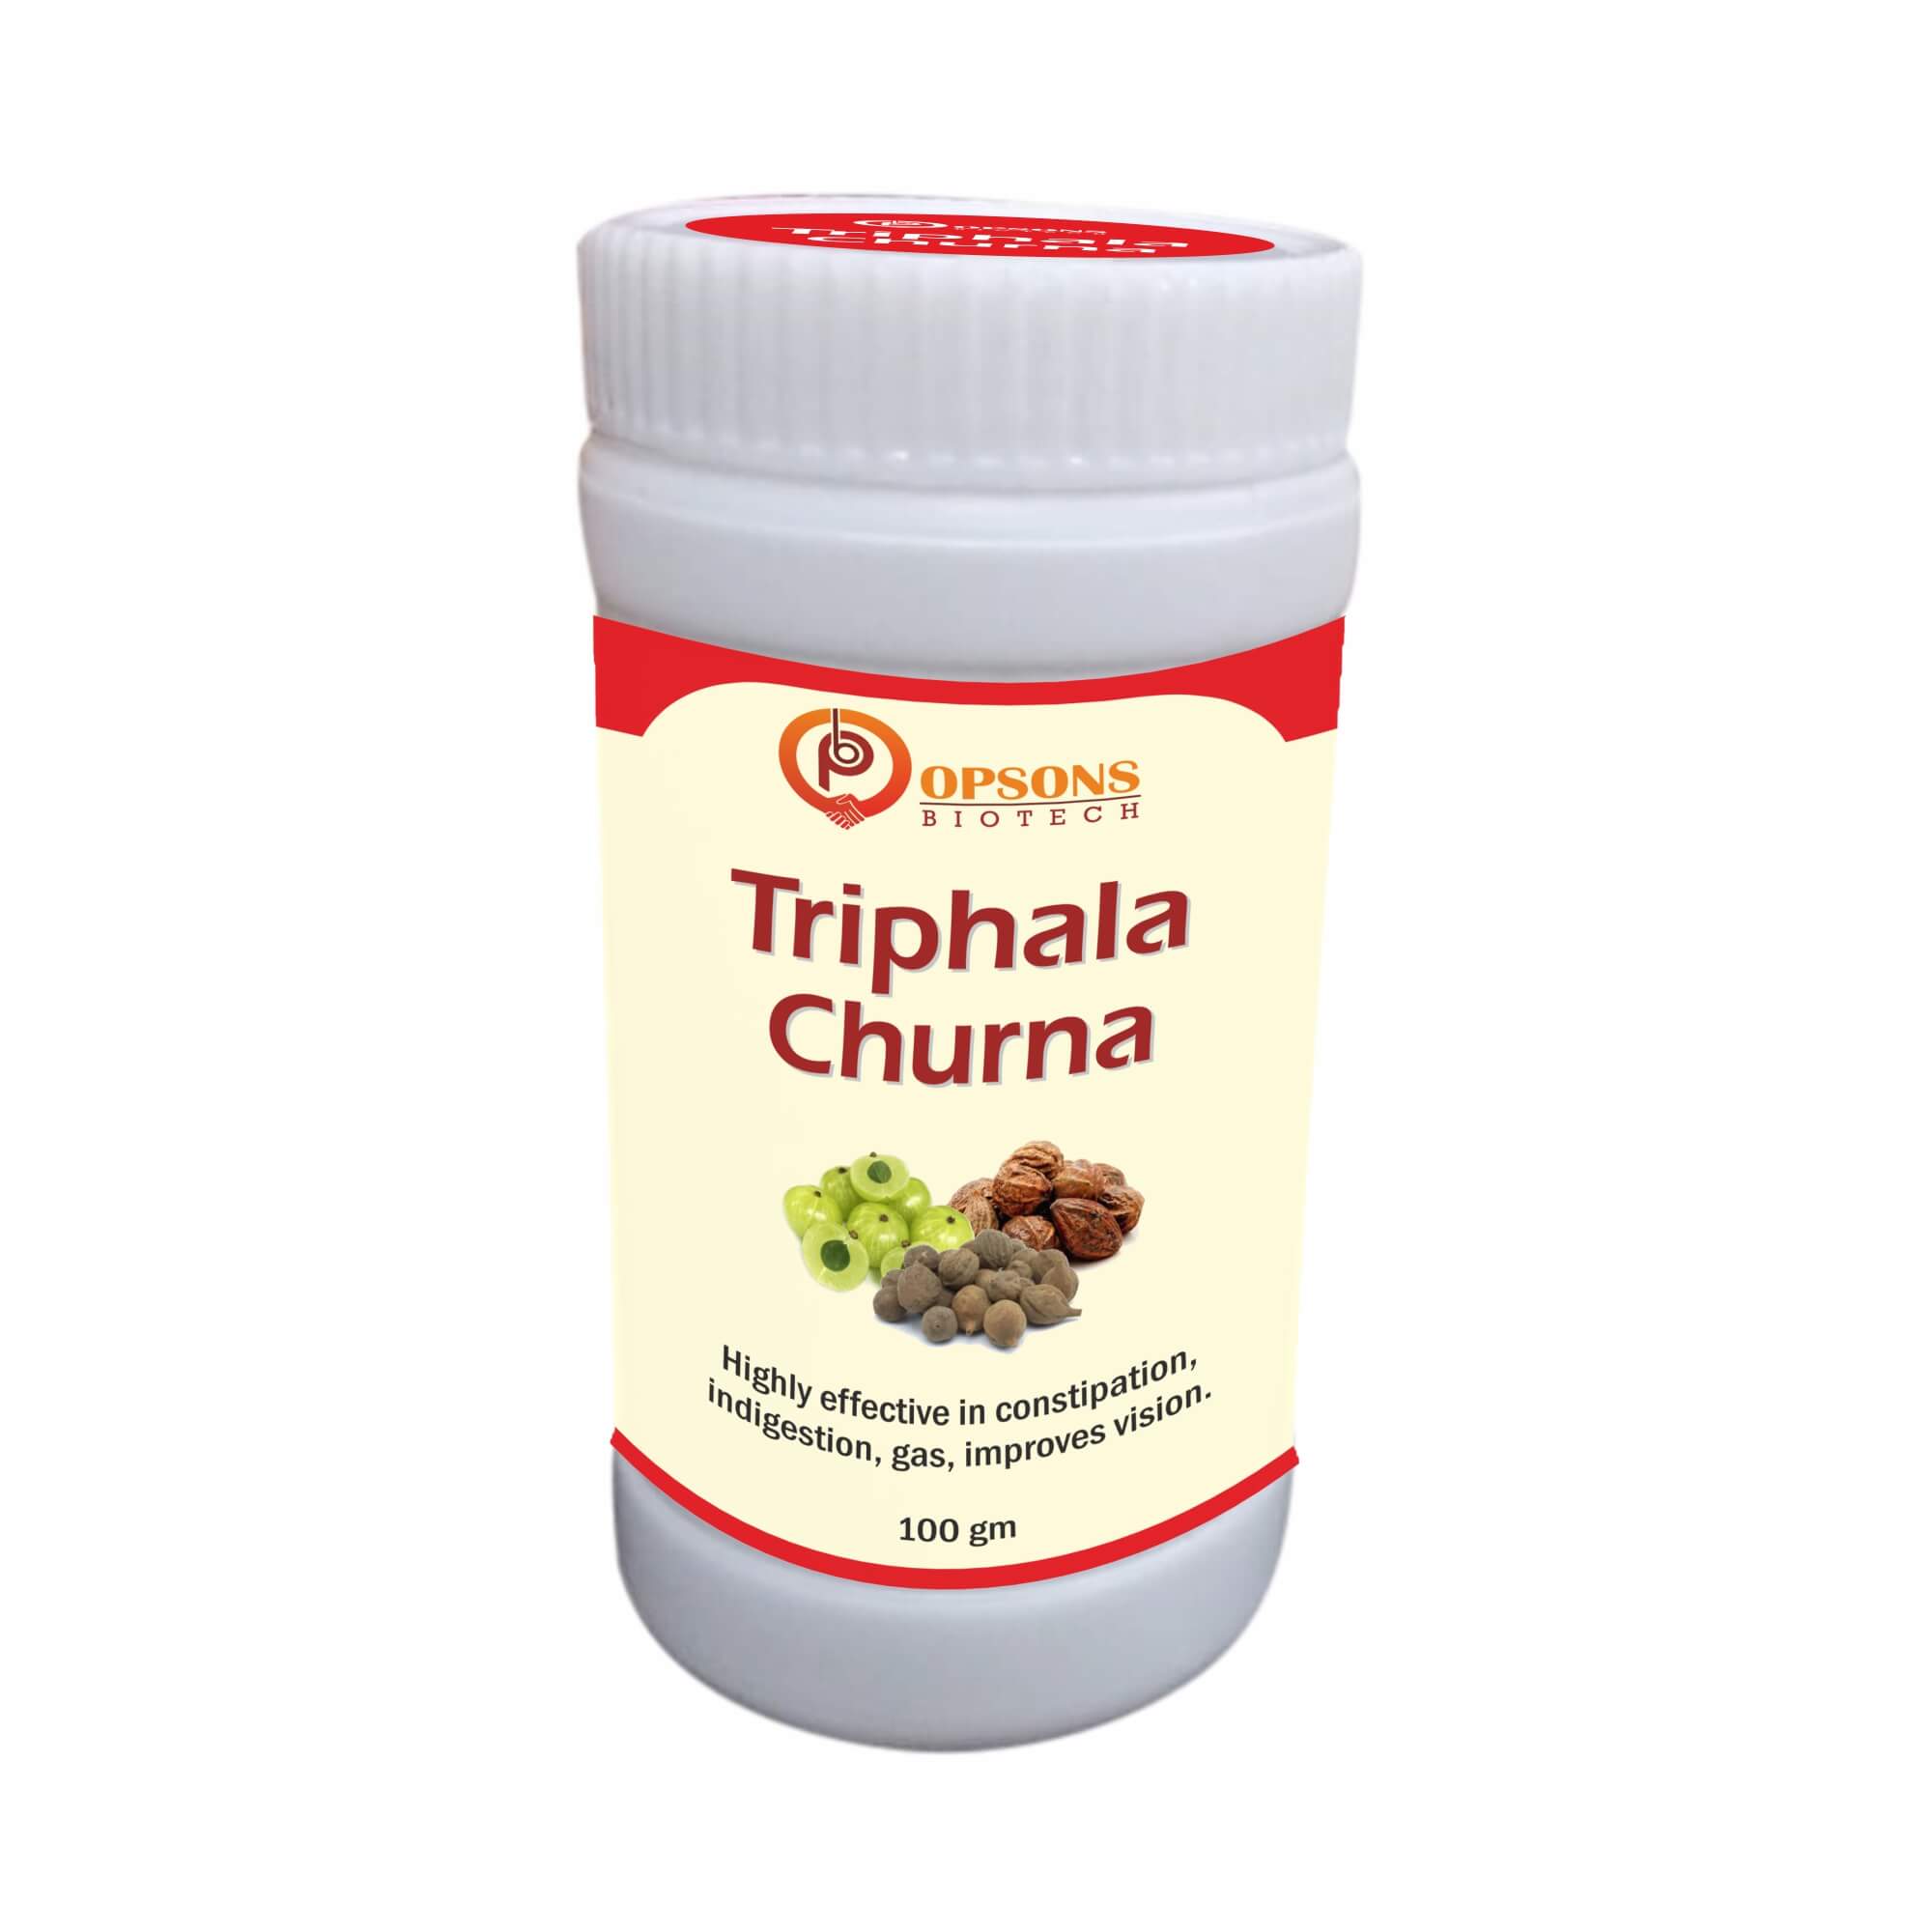 Product Name: Triphala Churana, Compositions of Triphala Churana are Highly effective in coonstipation,indigestion,gas,improves vision - Opsons Biotech